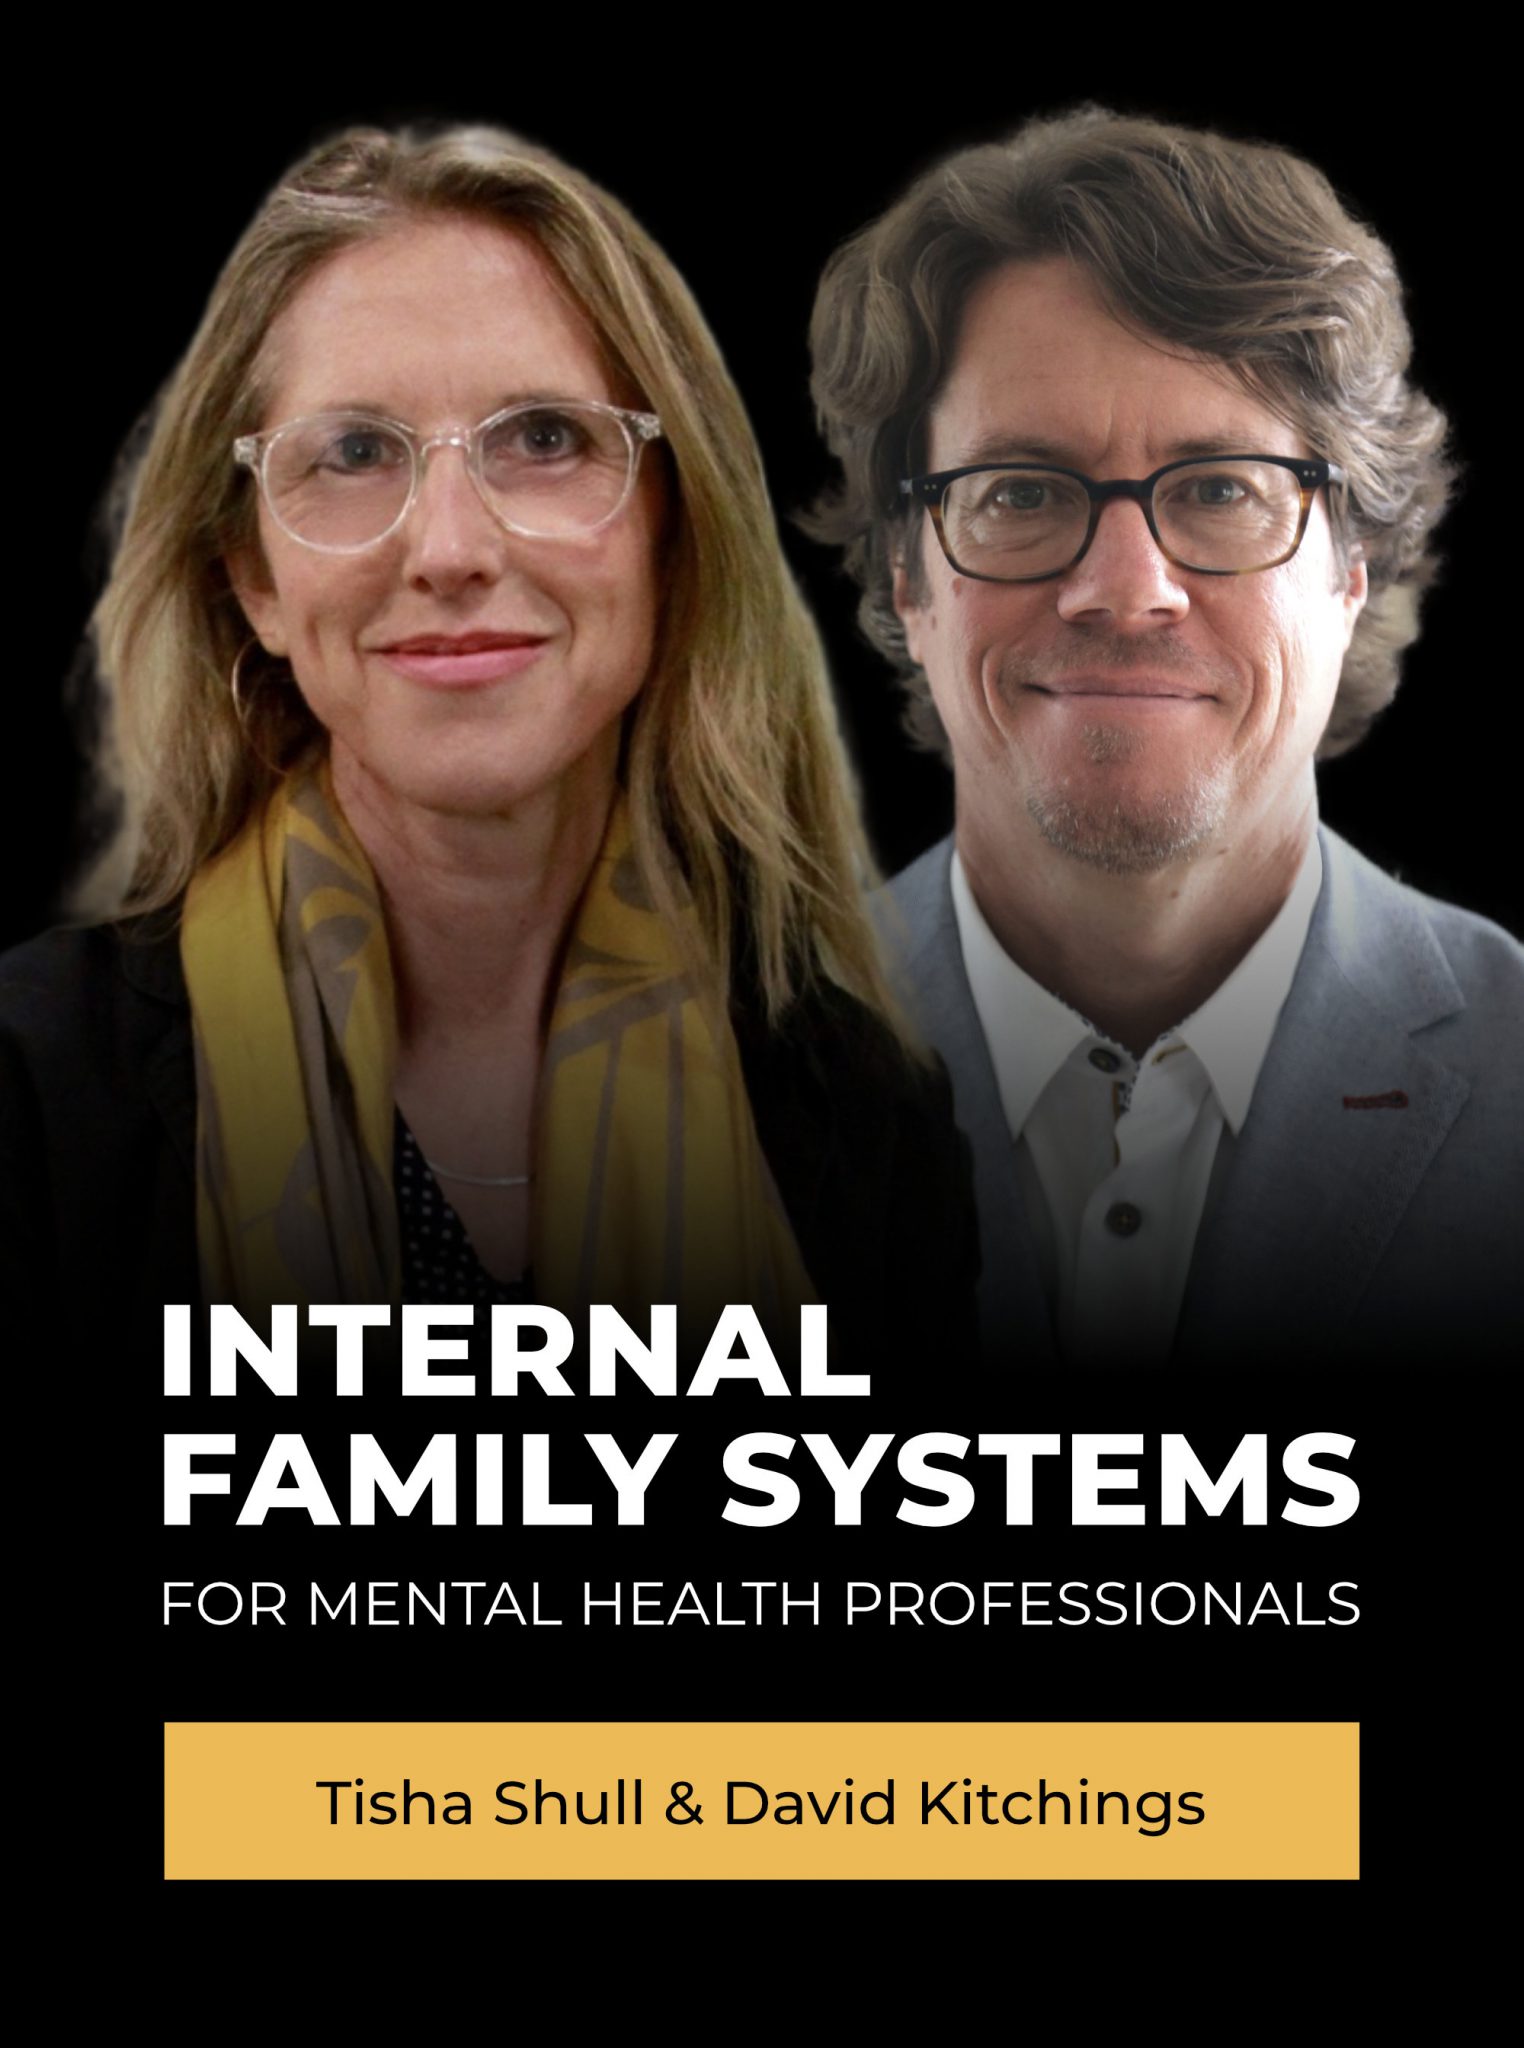 Internal Family Systems for mental health professionals